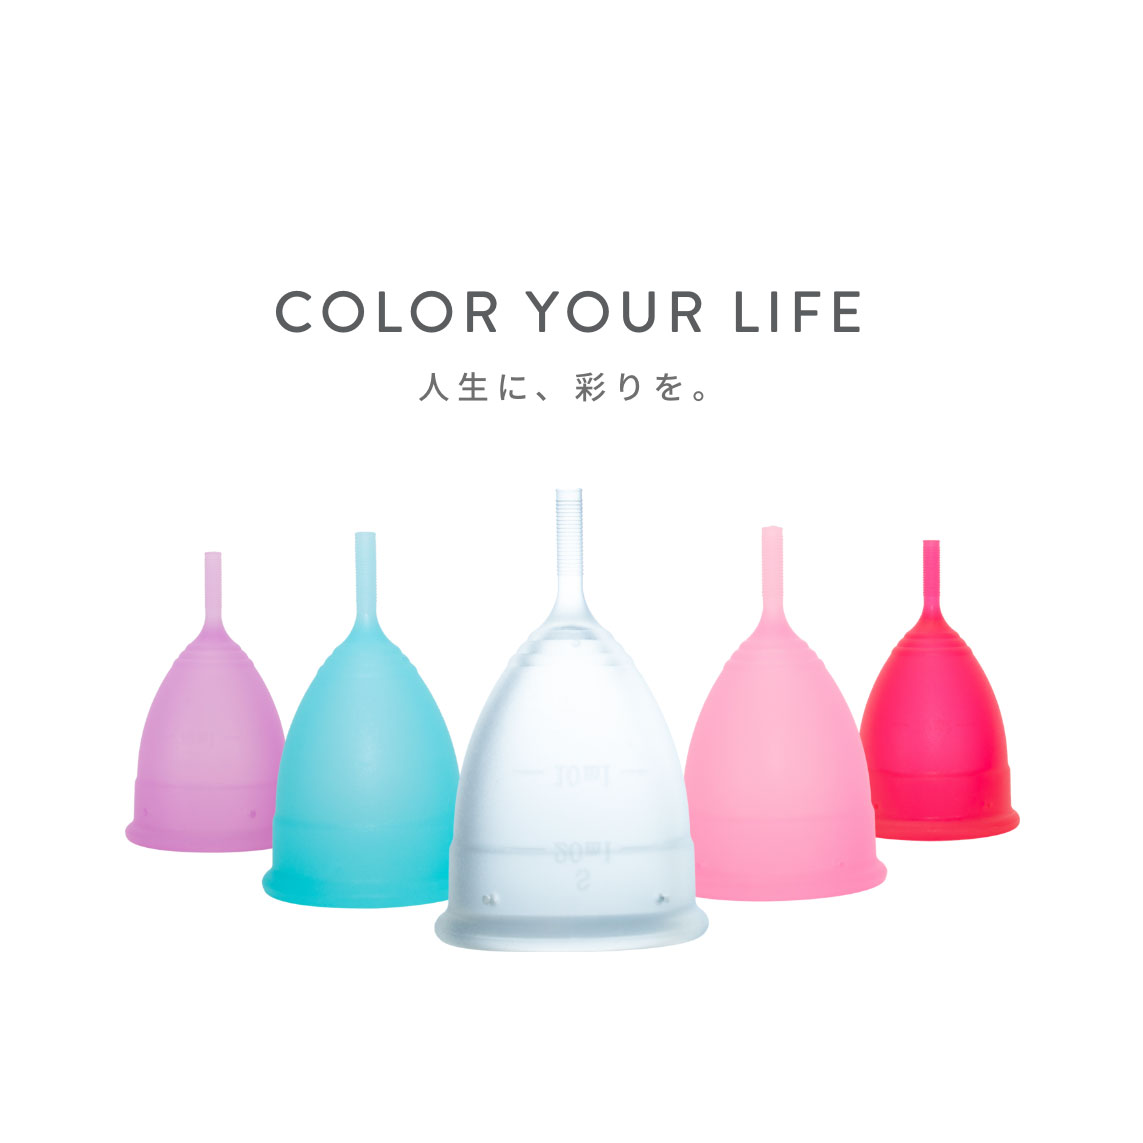 Color your life. 人生に彩りを。